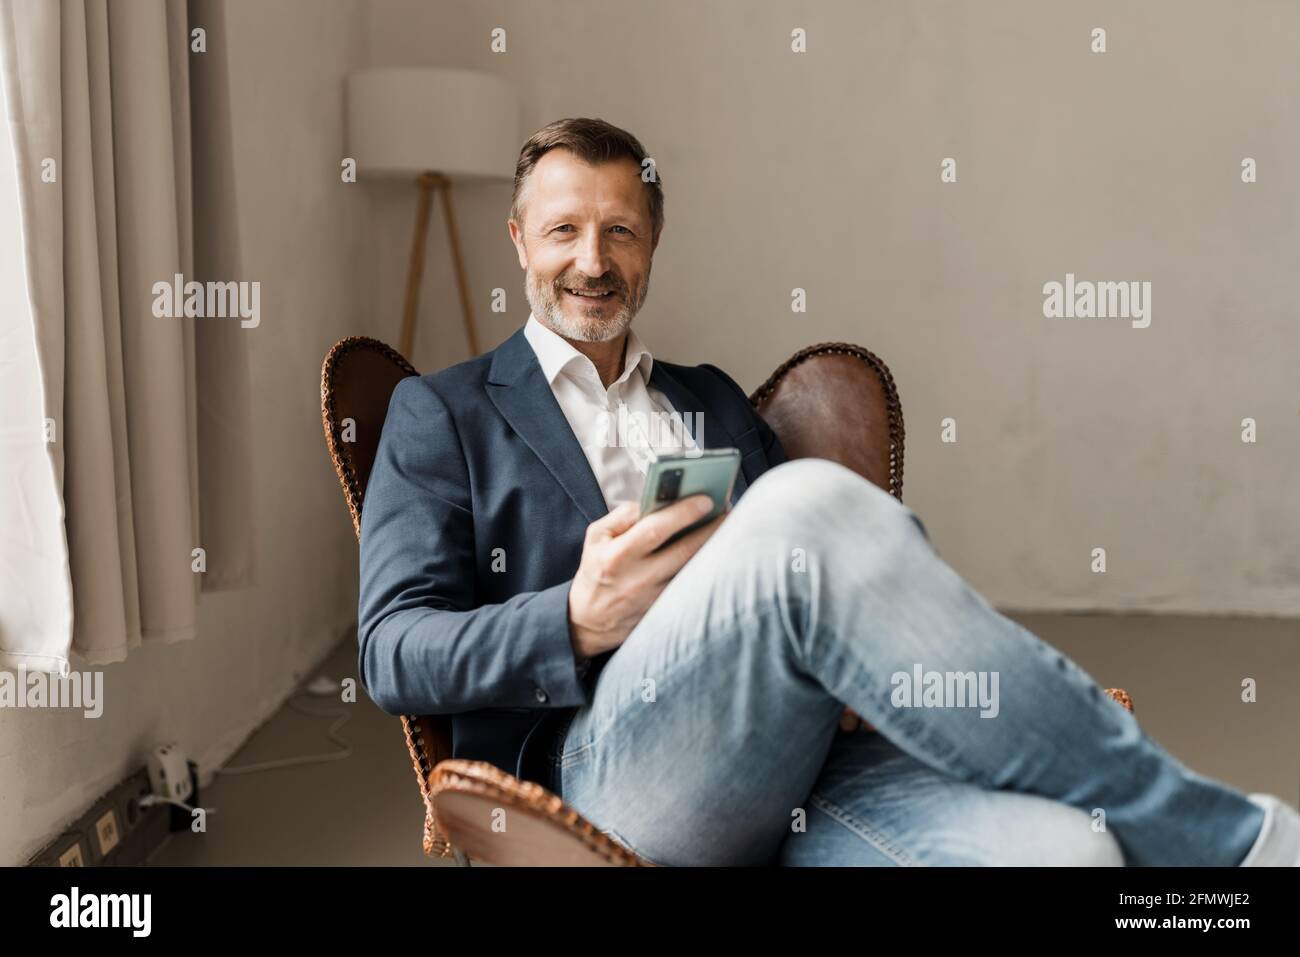 Attractive modern middle-aged man in jeans and stylish jacket relaxing in a leather chair with mobile phone in hand smiling at the camera Stock Photo